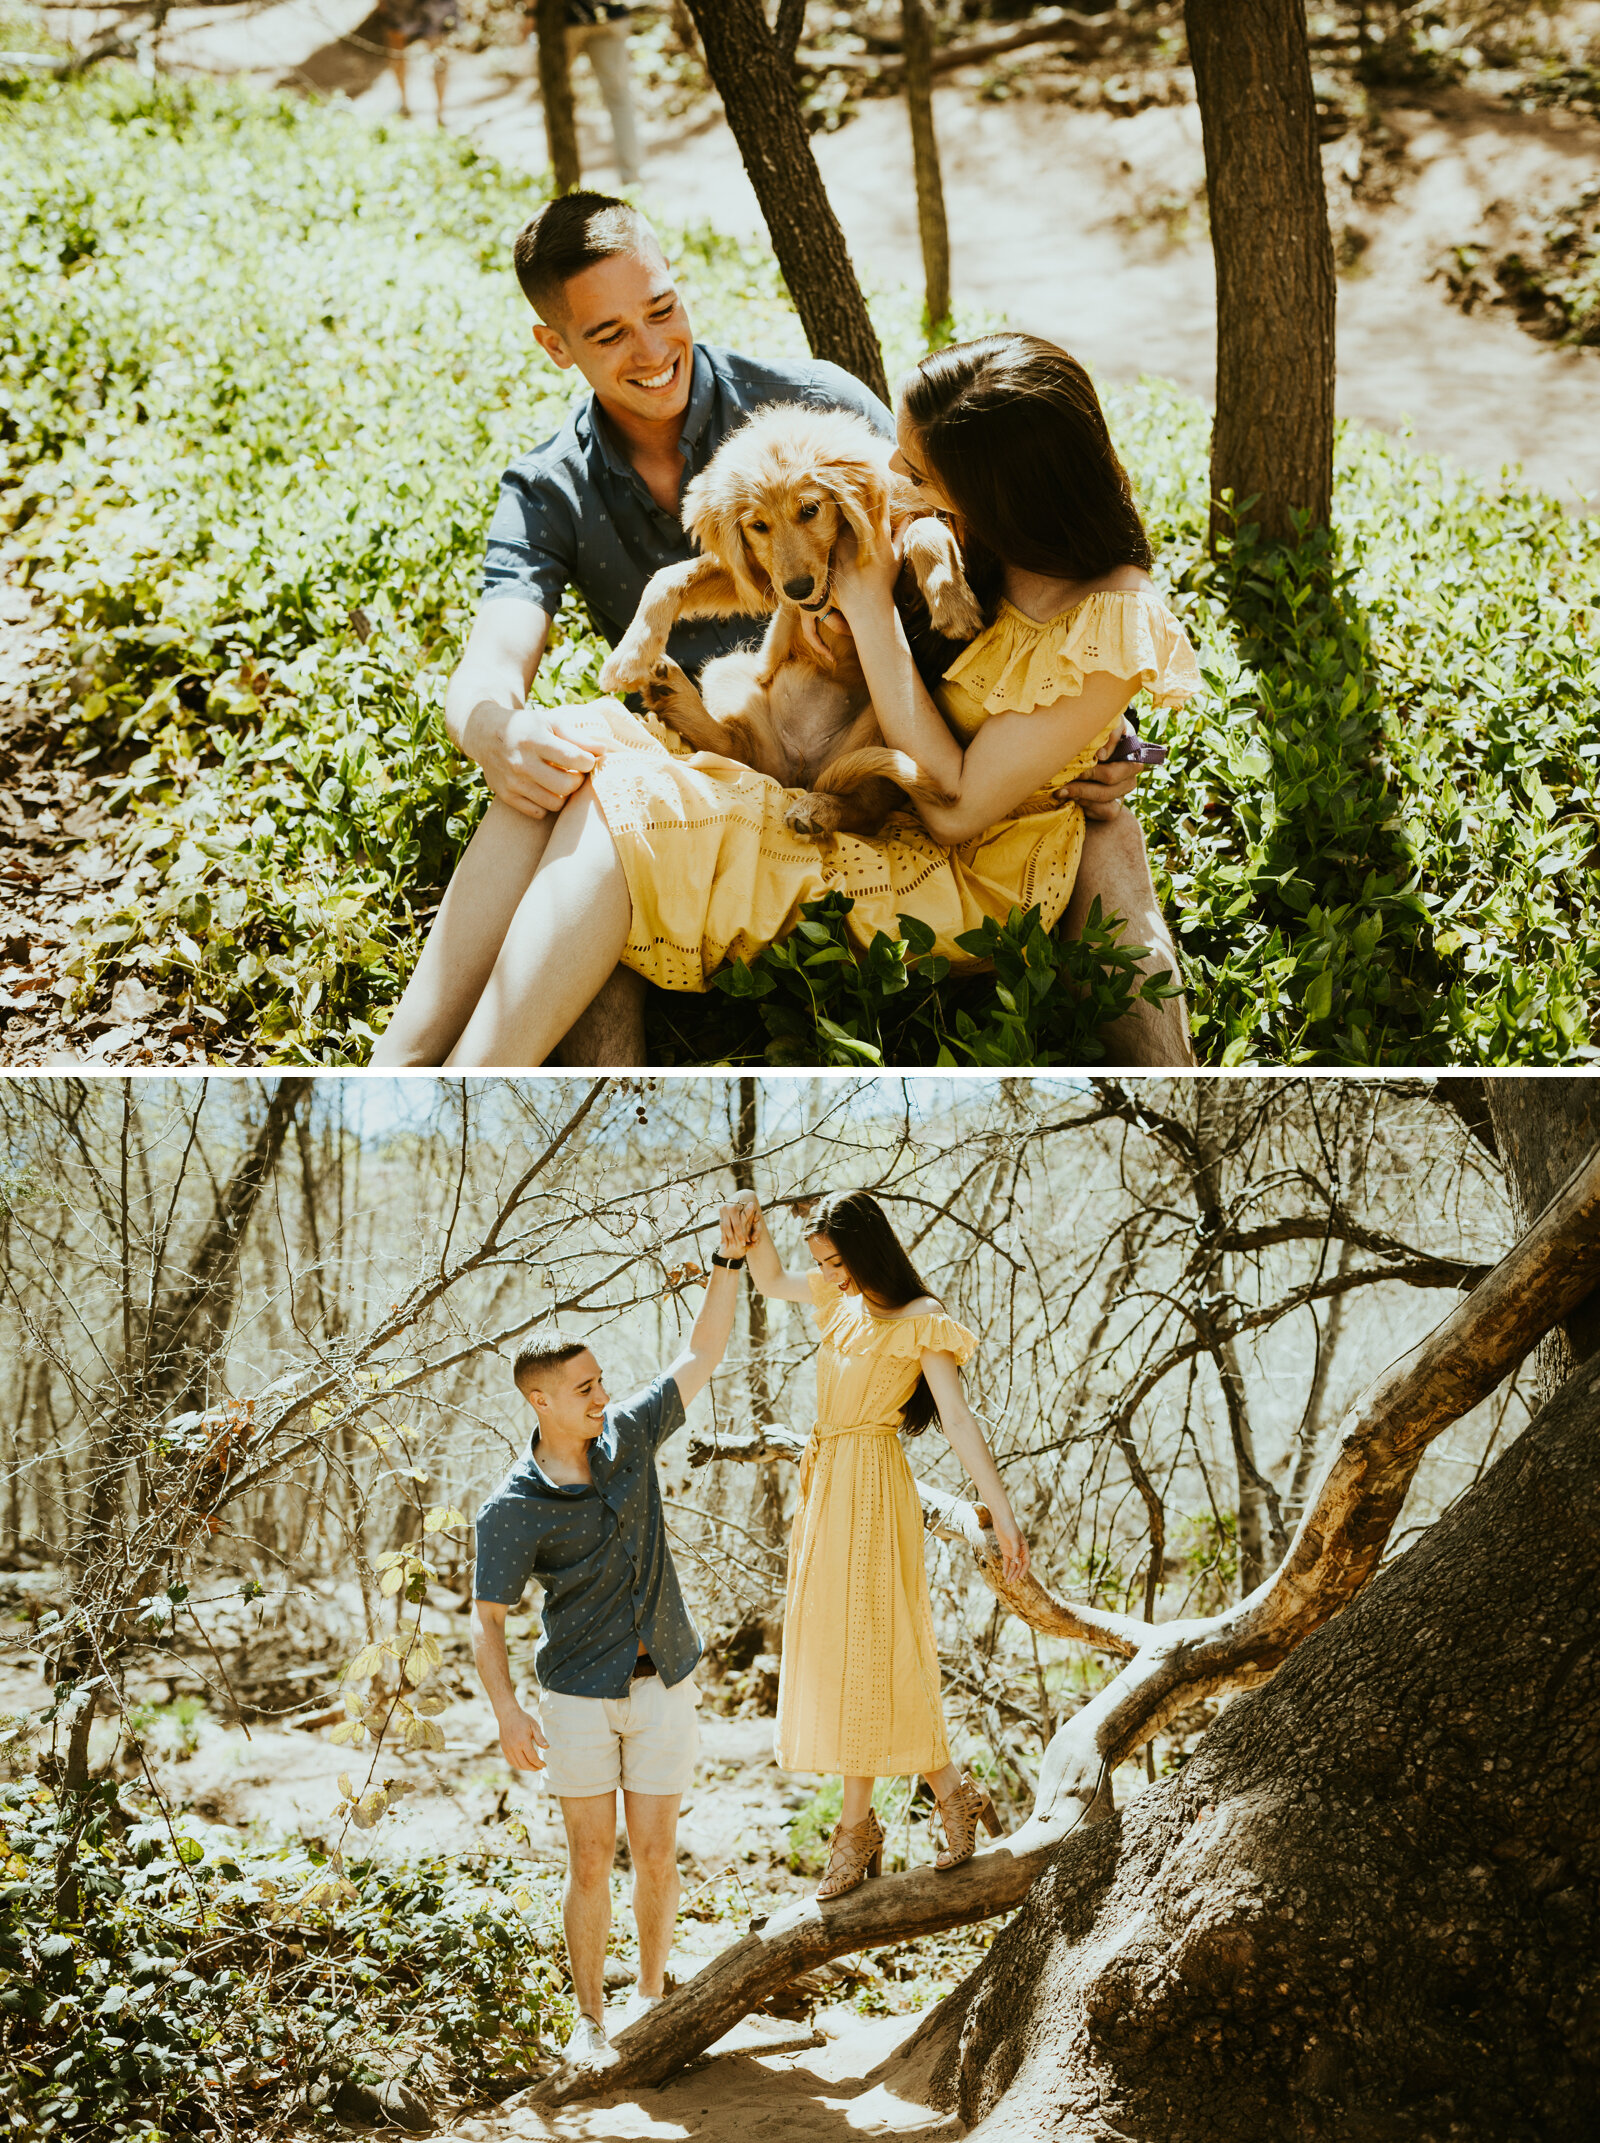 red rock crossing sedona arizona cathedral rock crescent moon ranch couple photos engagement photo outfit inspiration couple posing ideas midday photos anniversary photos goldendoodle puppy dog couple photos.jpg